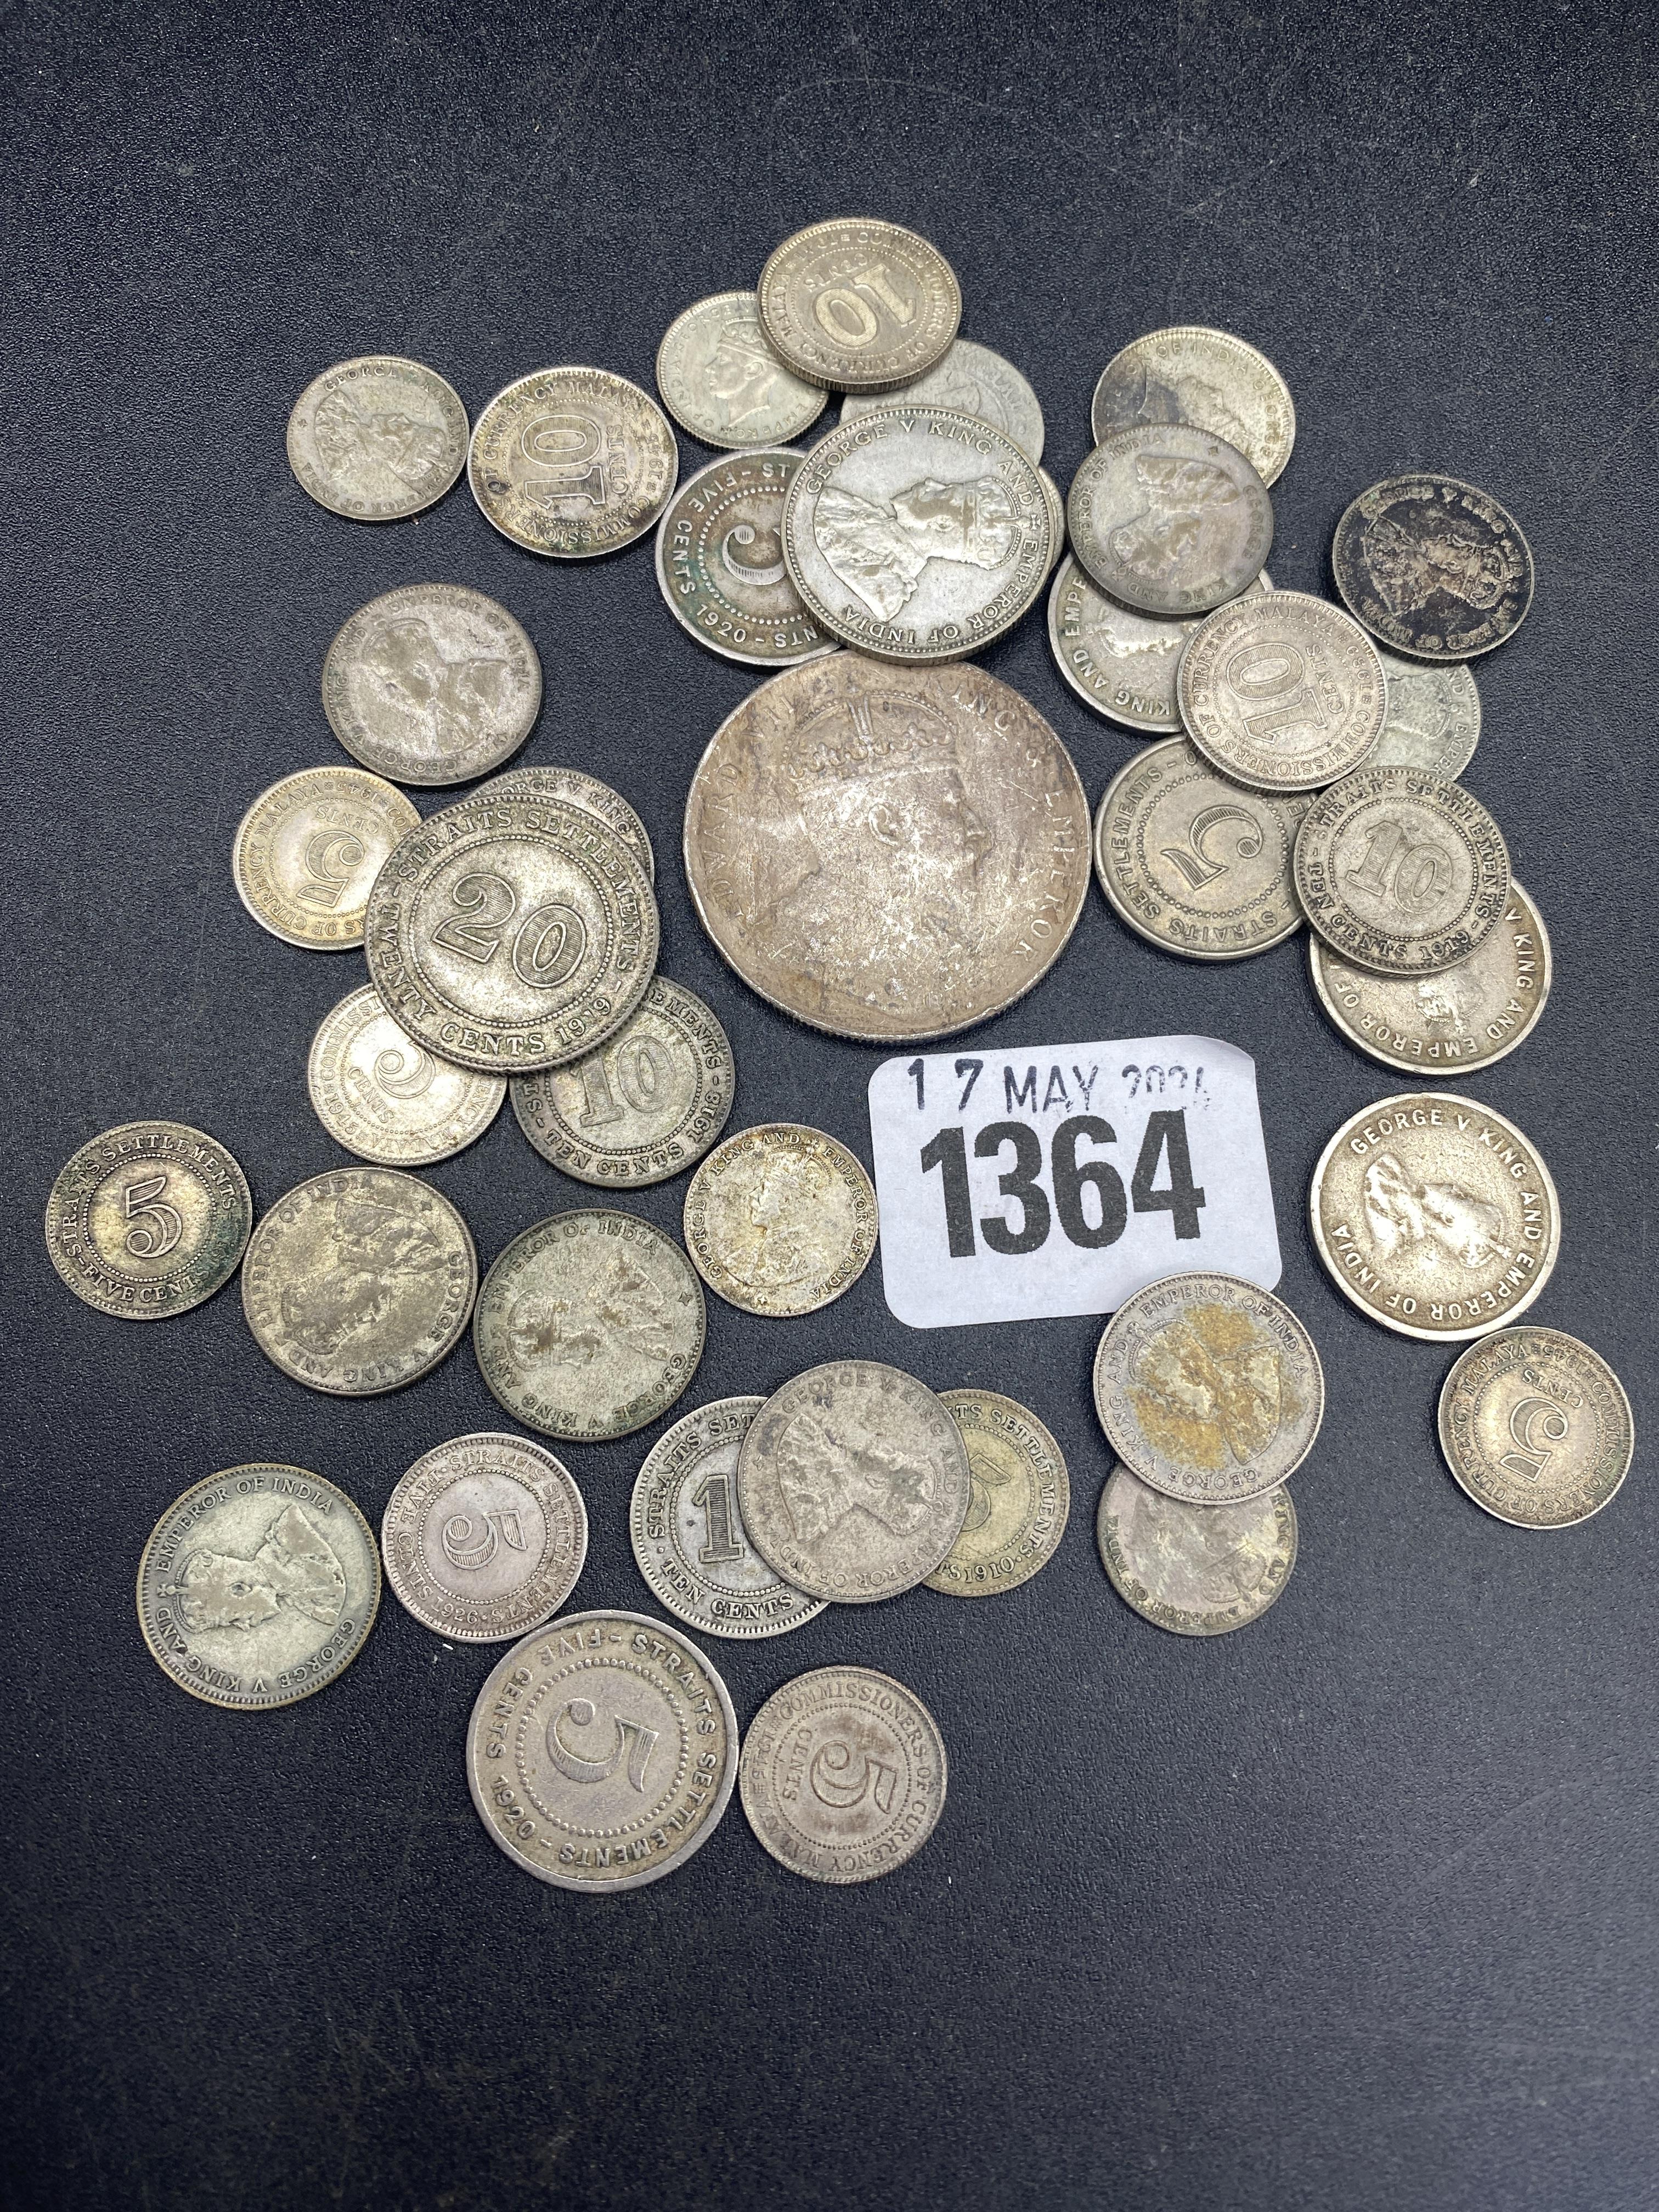 Straits Settlements and Malaya silver coins plus others